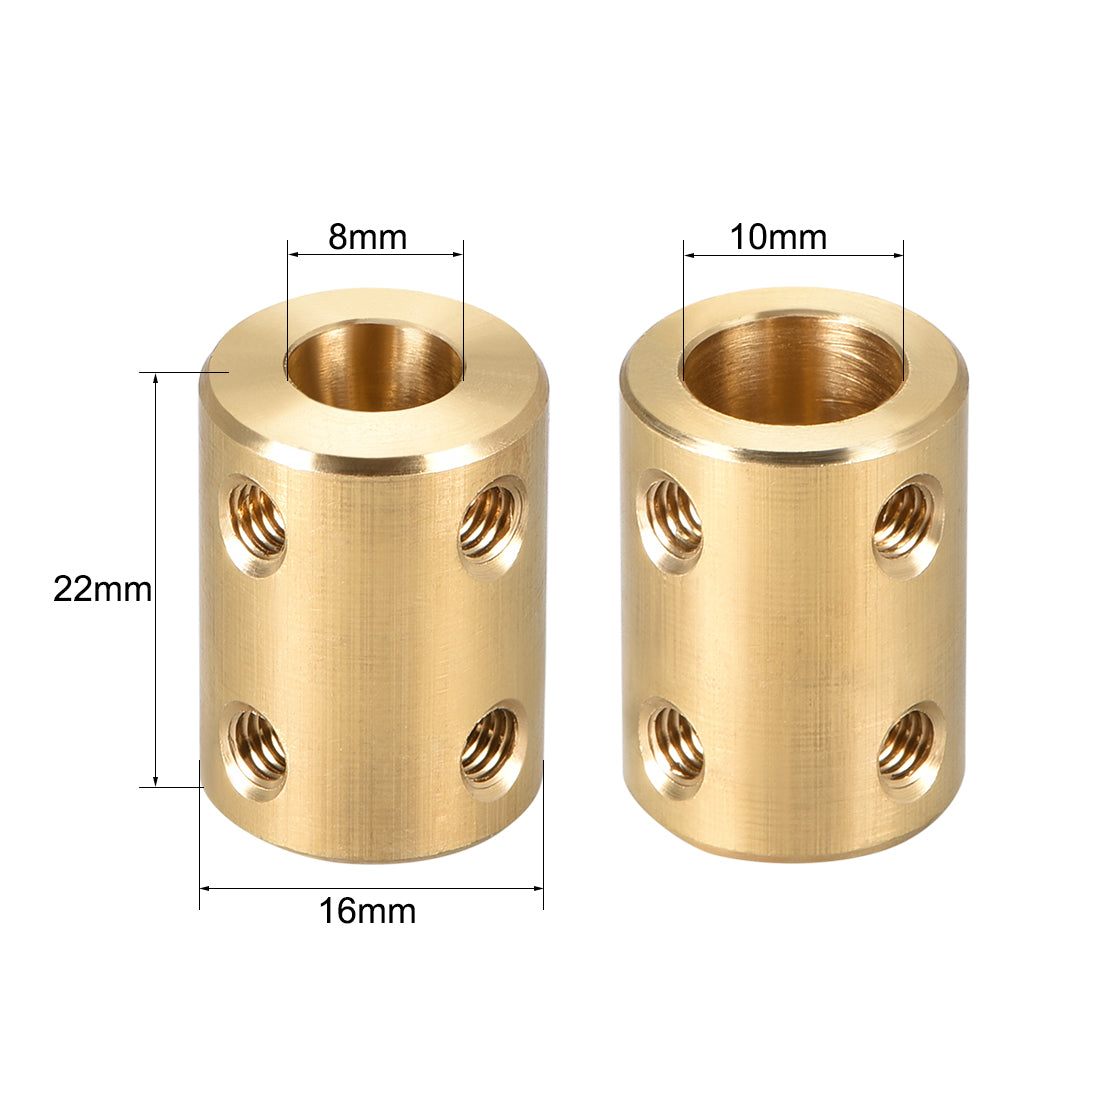 uxcell Uxcell Shaft Coupling 8mm to 10mm Bore L22xD16 Robot Motor Wheel Rigid Coupler Connector Gold Tone